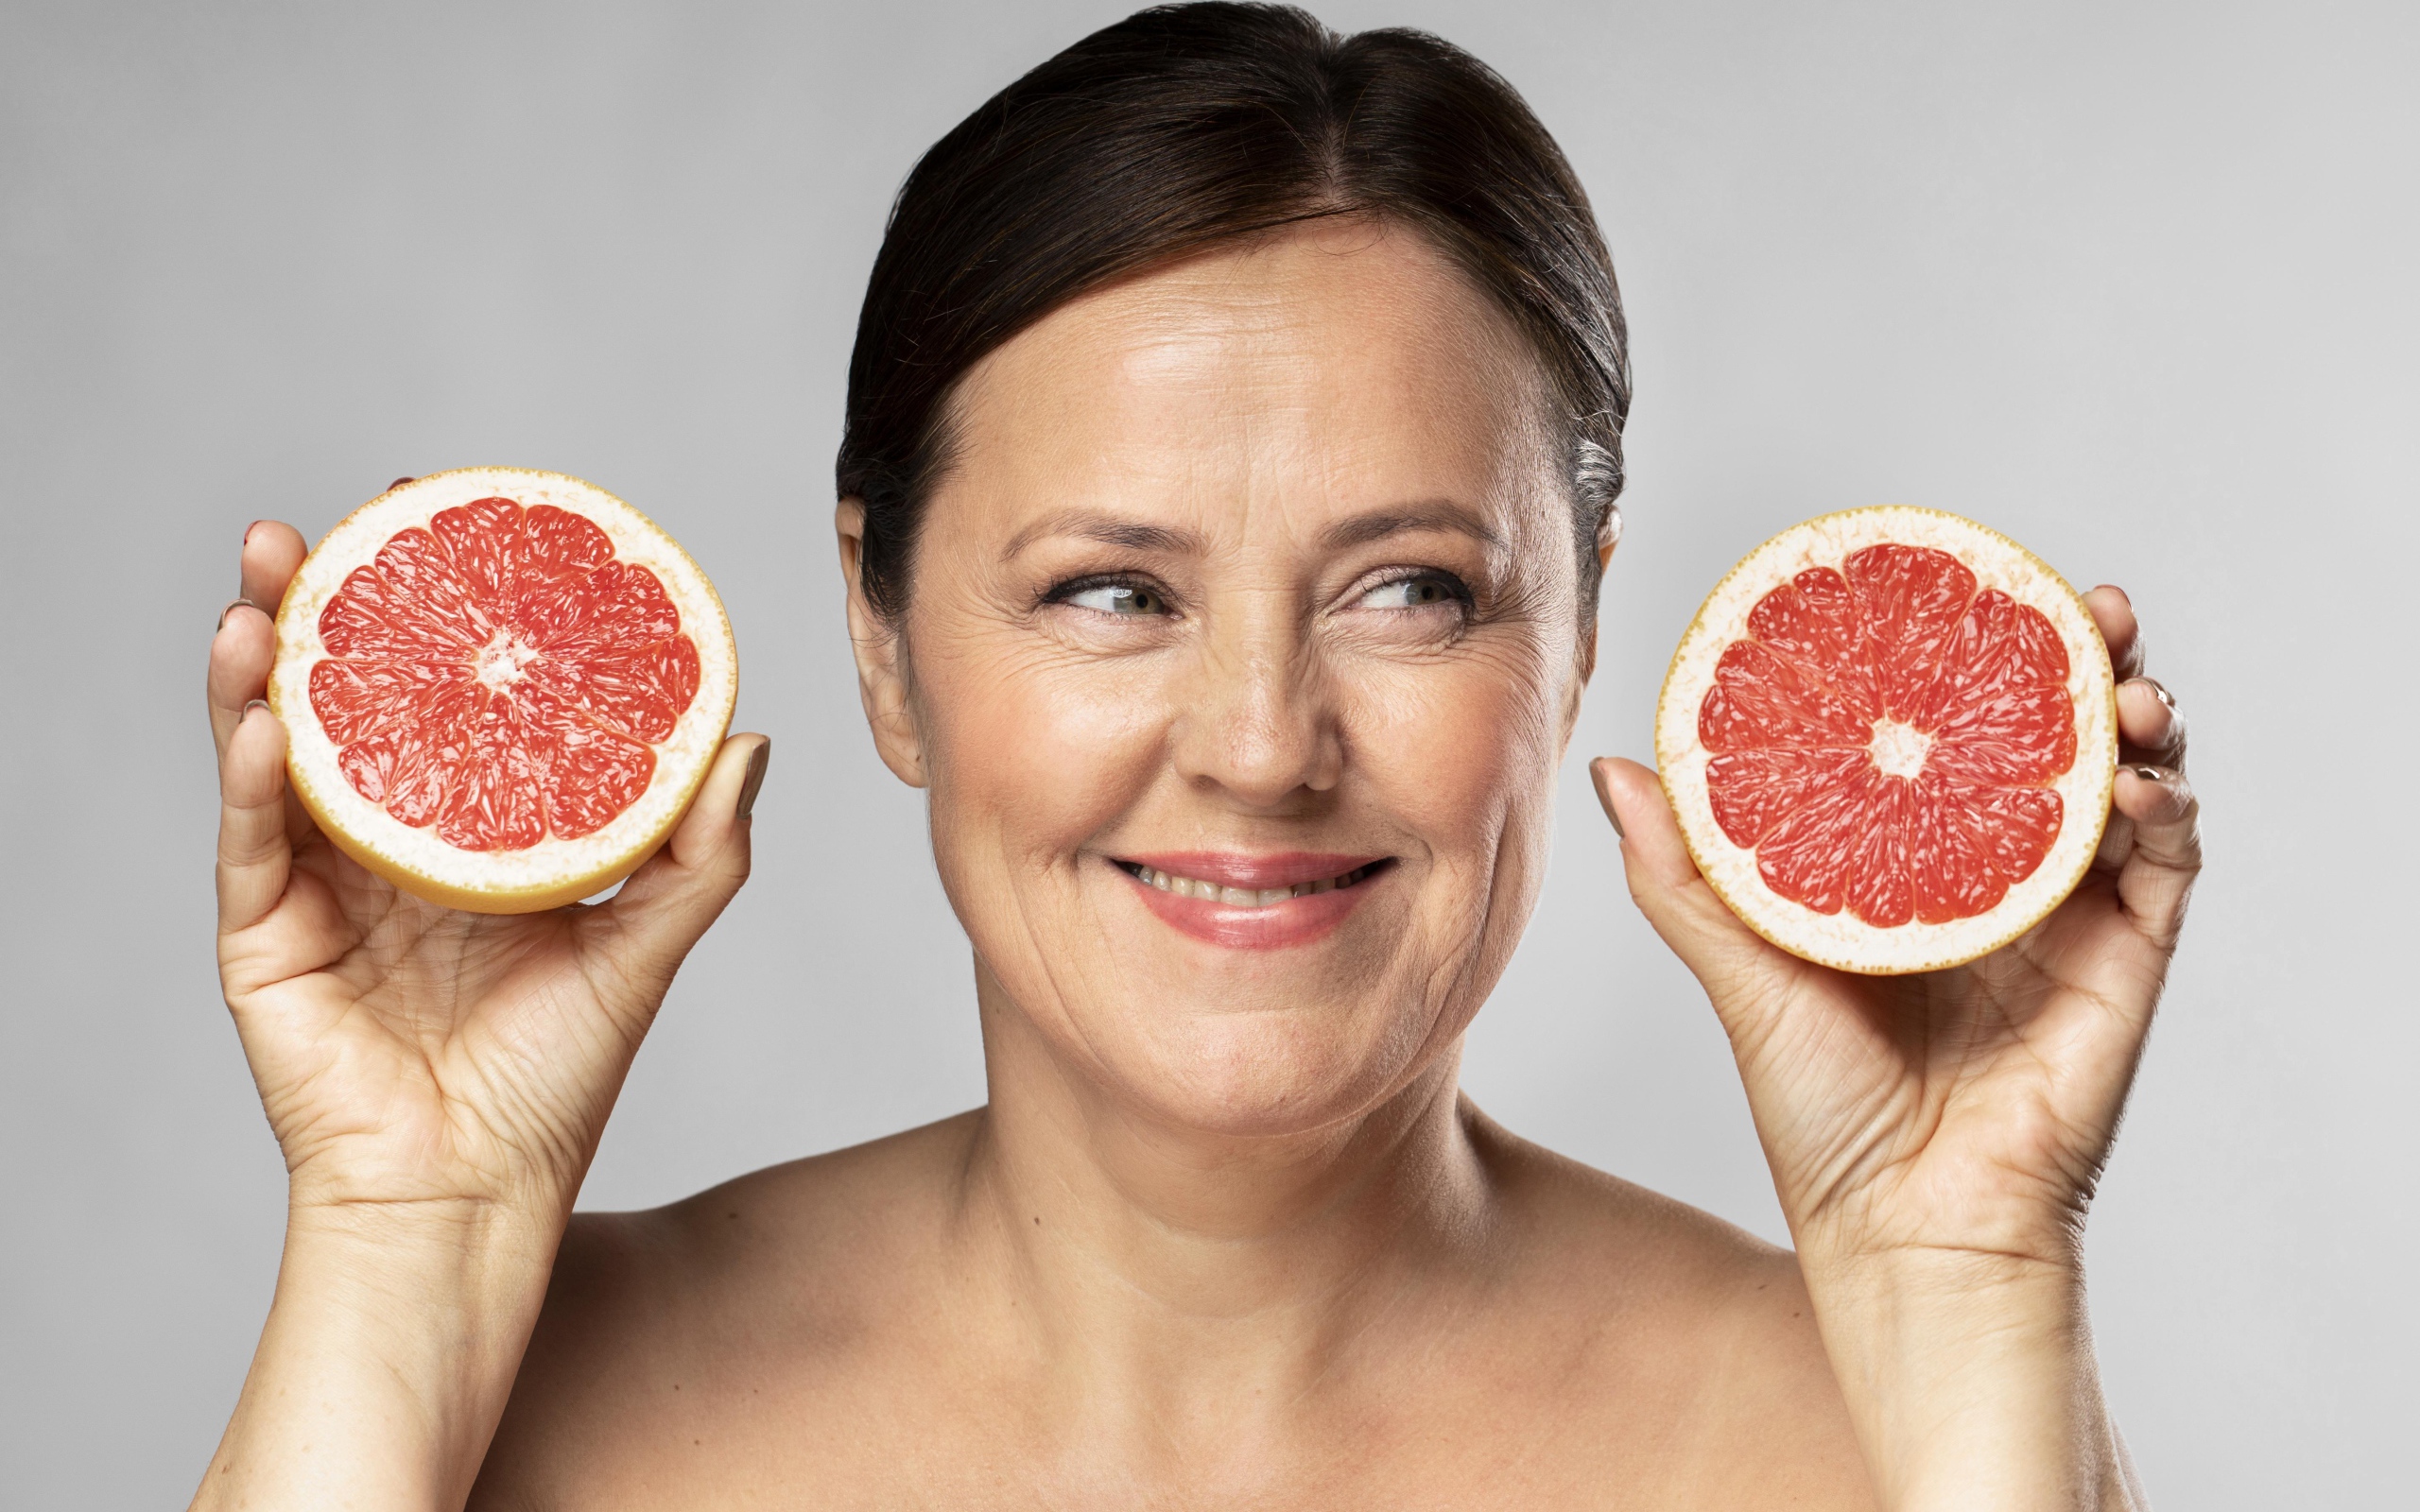 Smiling woman with grapefruit in hands on gray background